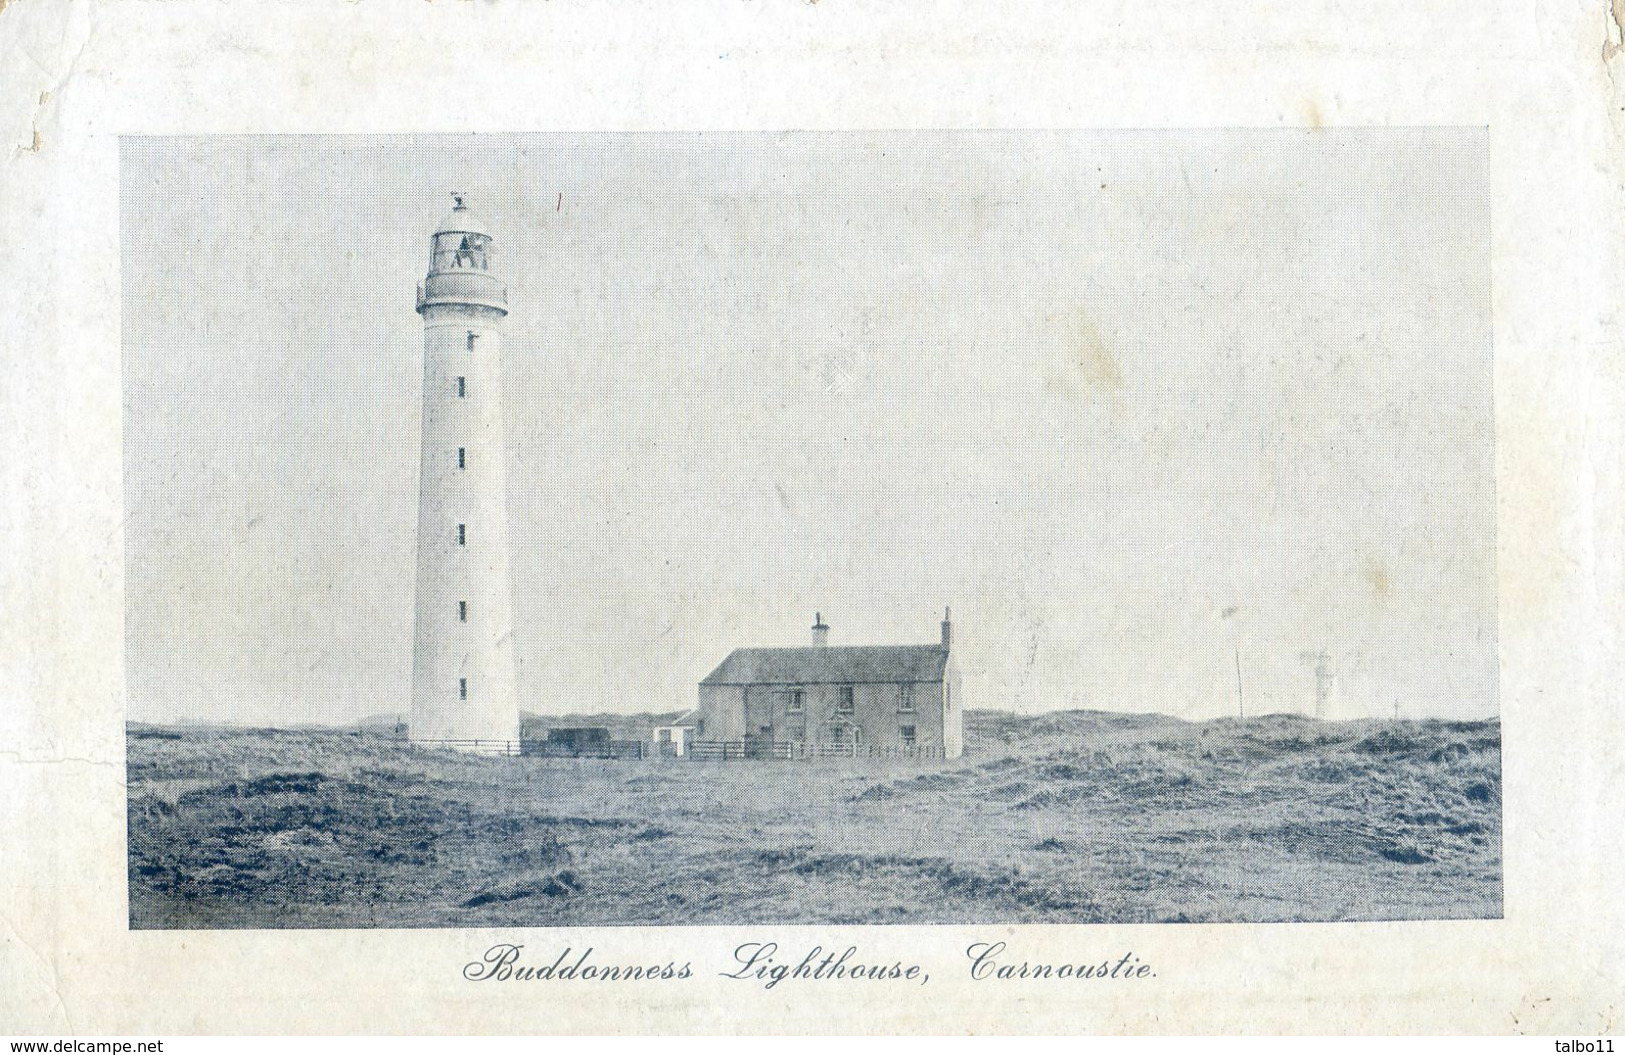 Carnoustie - Buddonness Lighthouse - Angus